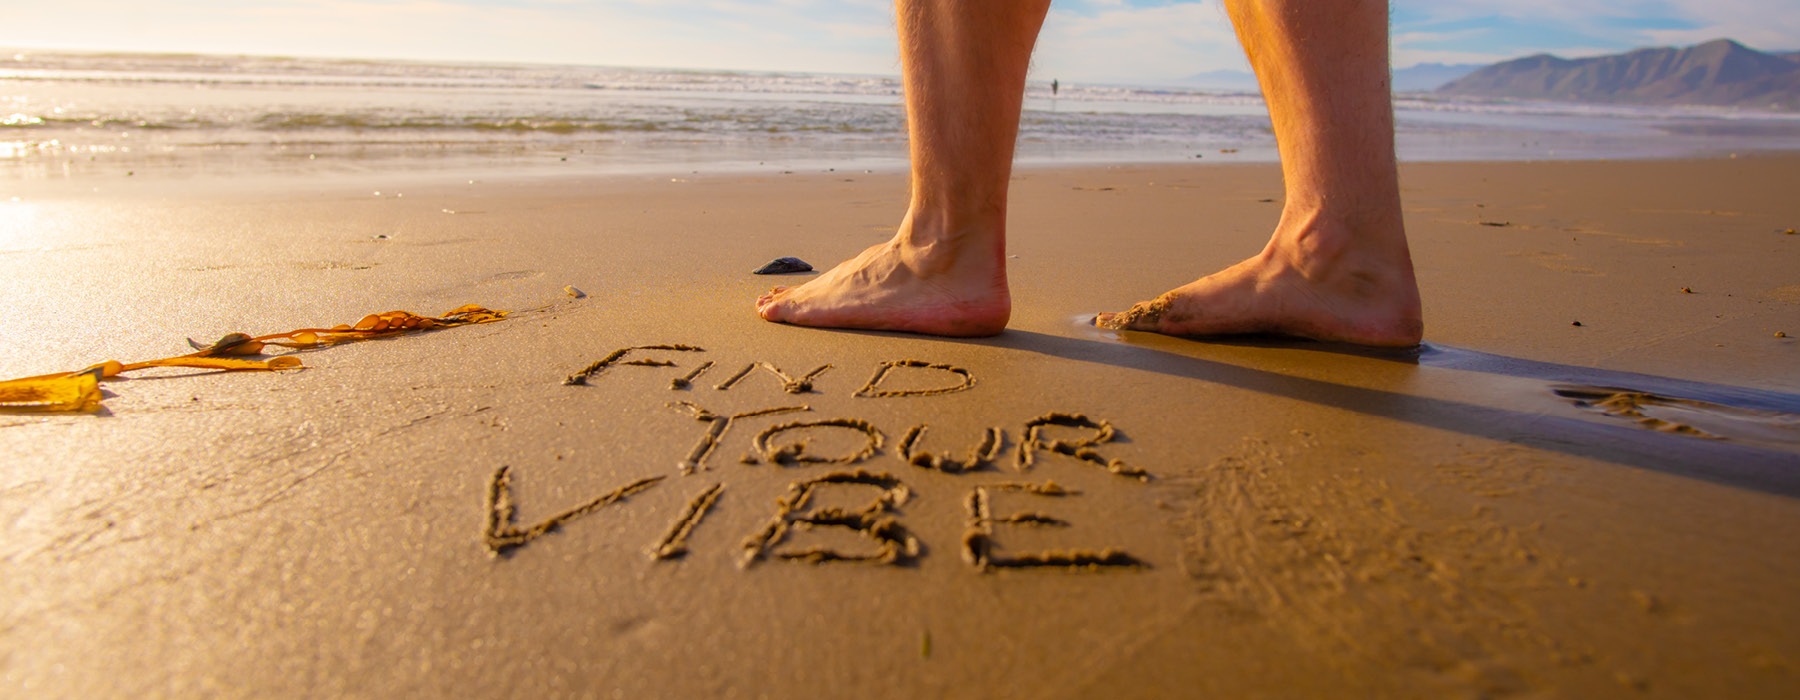 lifestyle image of words written in the sand beside a person's feet